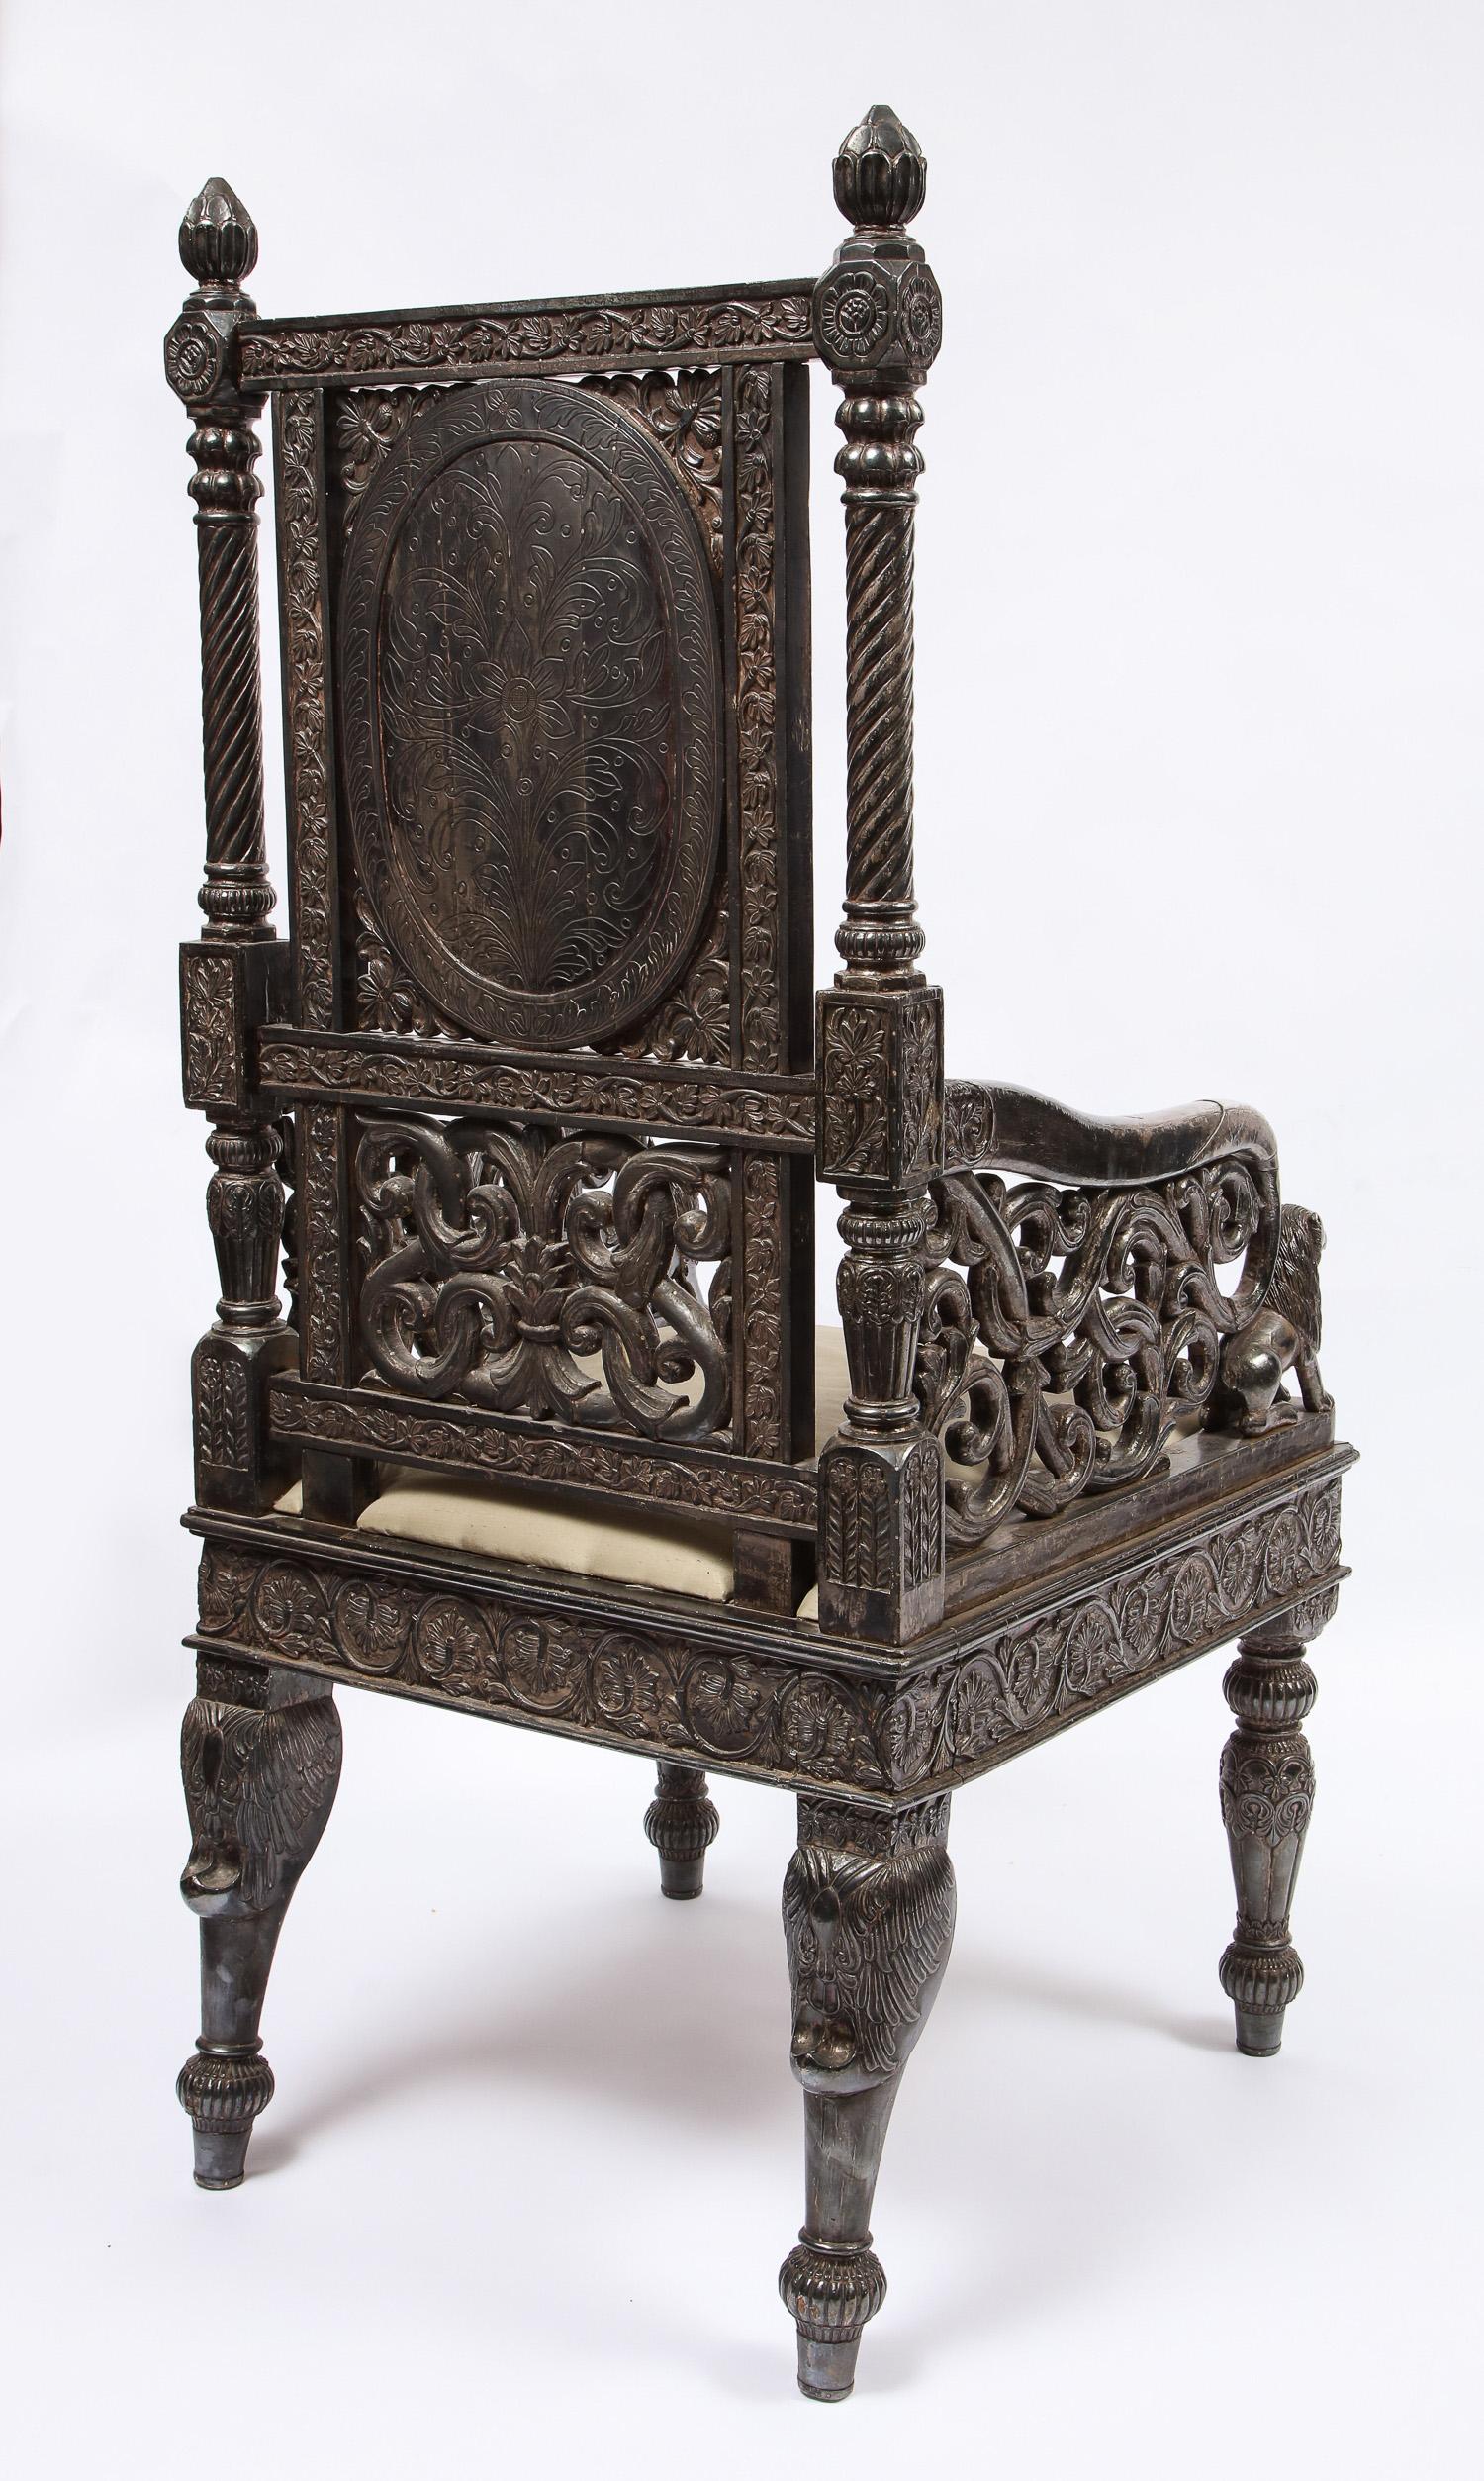 Indian Mogul Style Silver-Clad Gilded Ceremonial Throne Chair for the Maharajah For Sale 3